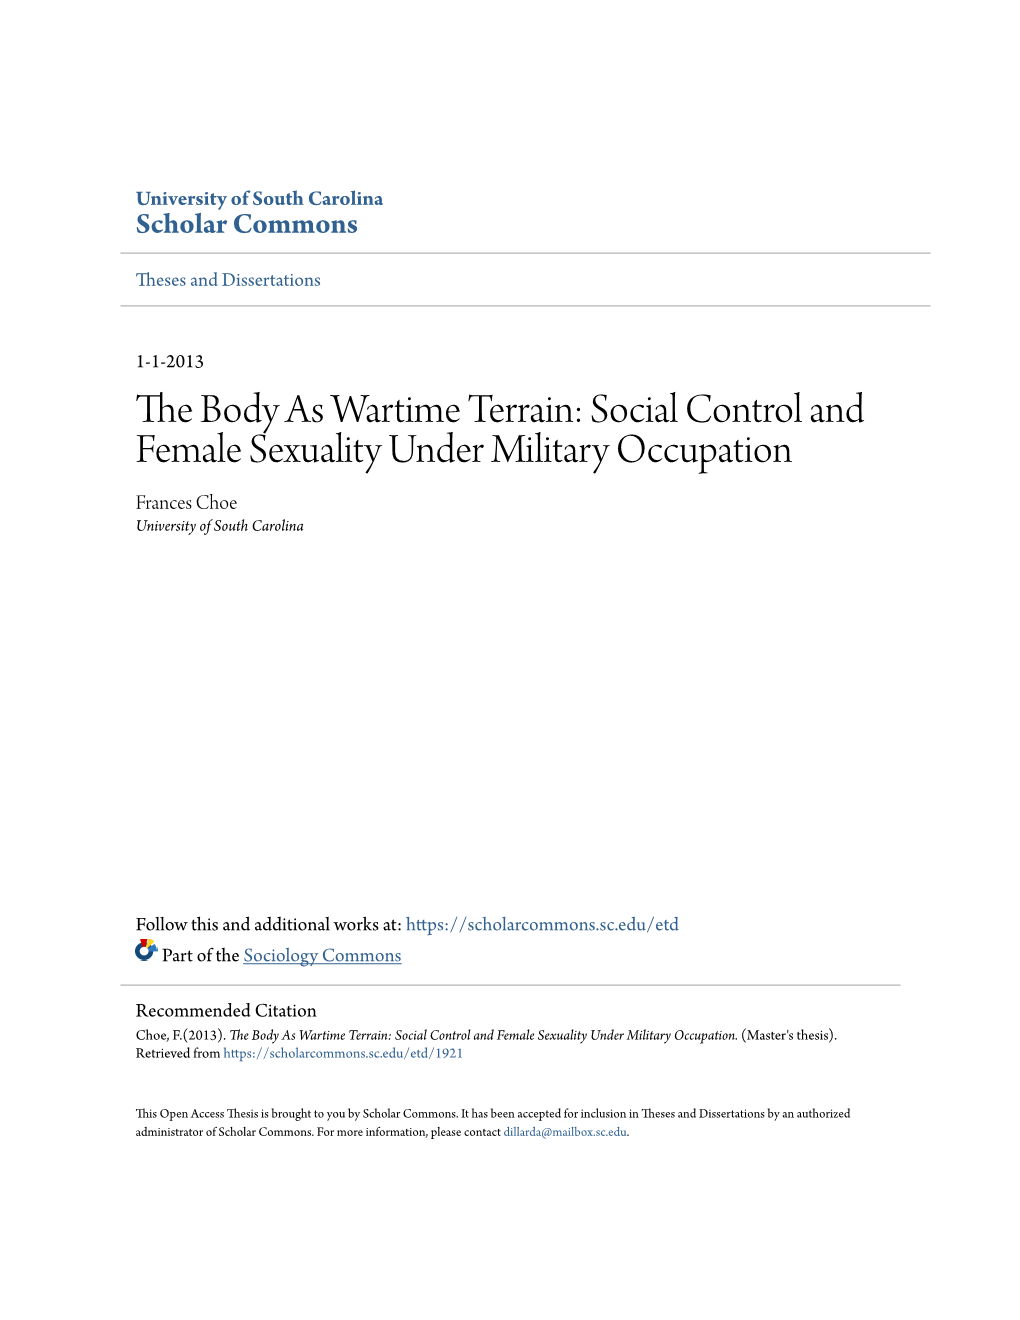 The Body As Wartime Terrain: Social Control and Female Sexuality Under Military Occupation Frances Choe University of South Carolina